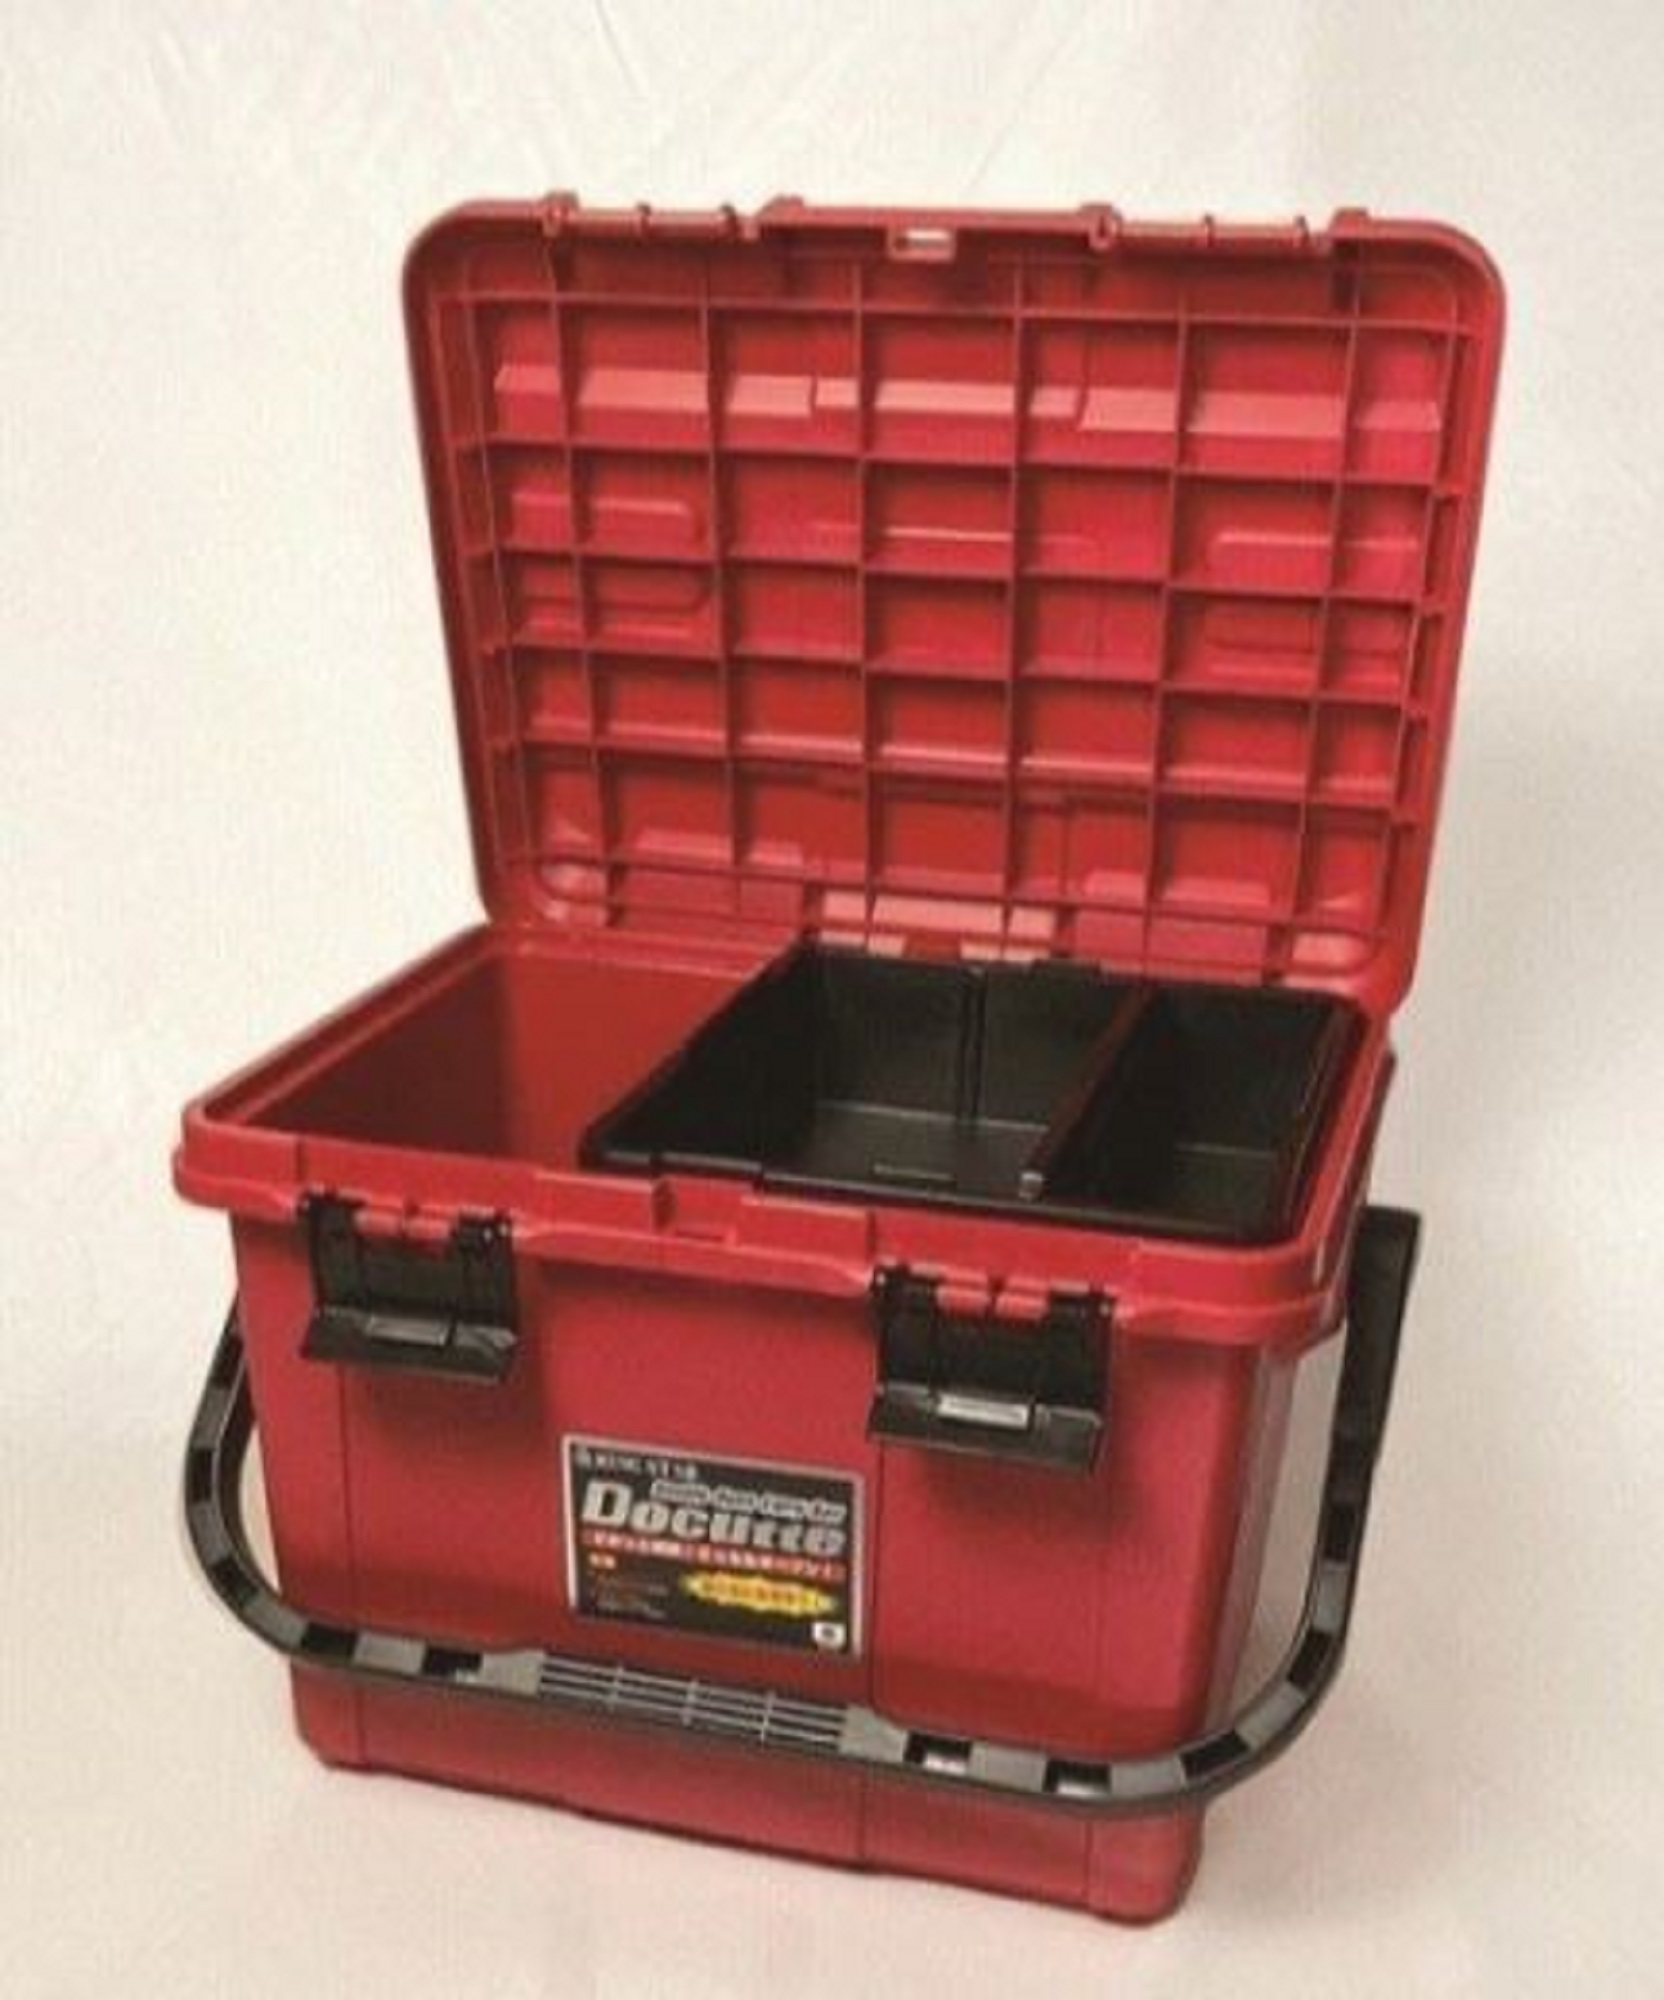 Details about   Ring Star Docutte D-4700 BR Tackle Box 465 x 333 x 322 mm Red 3313